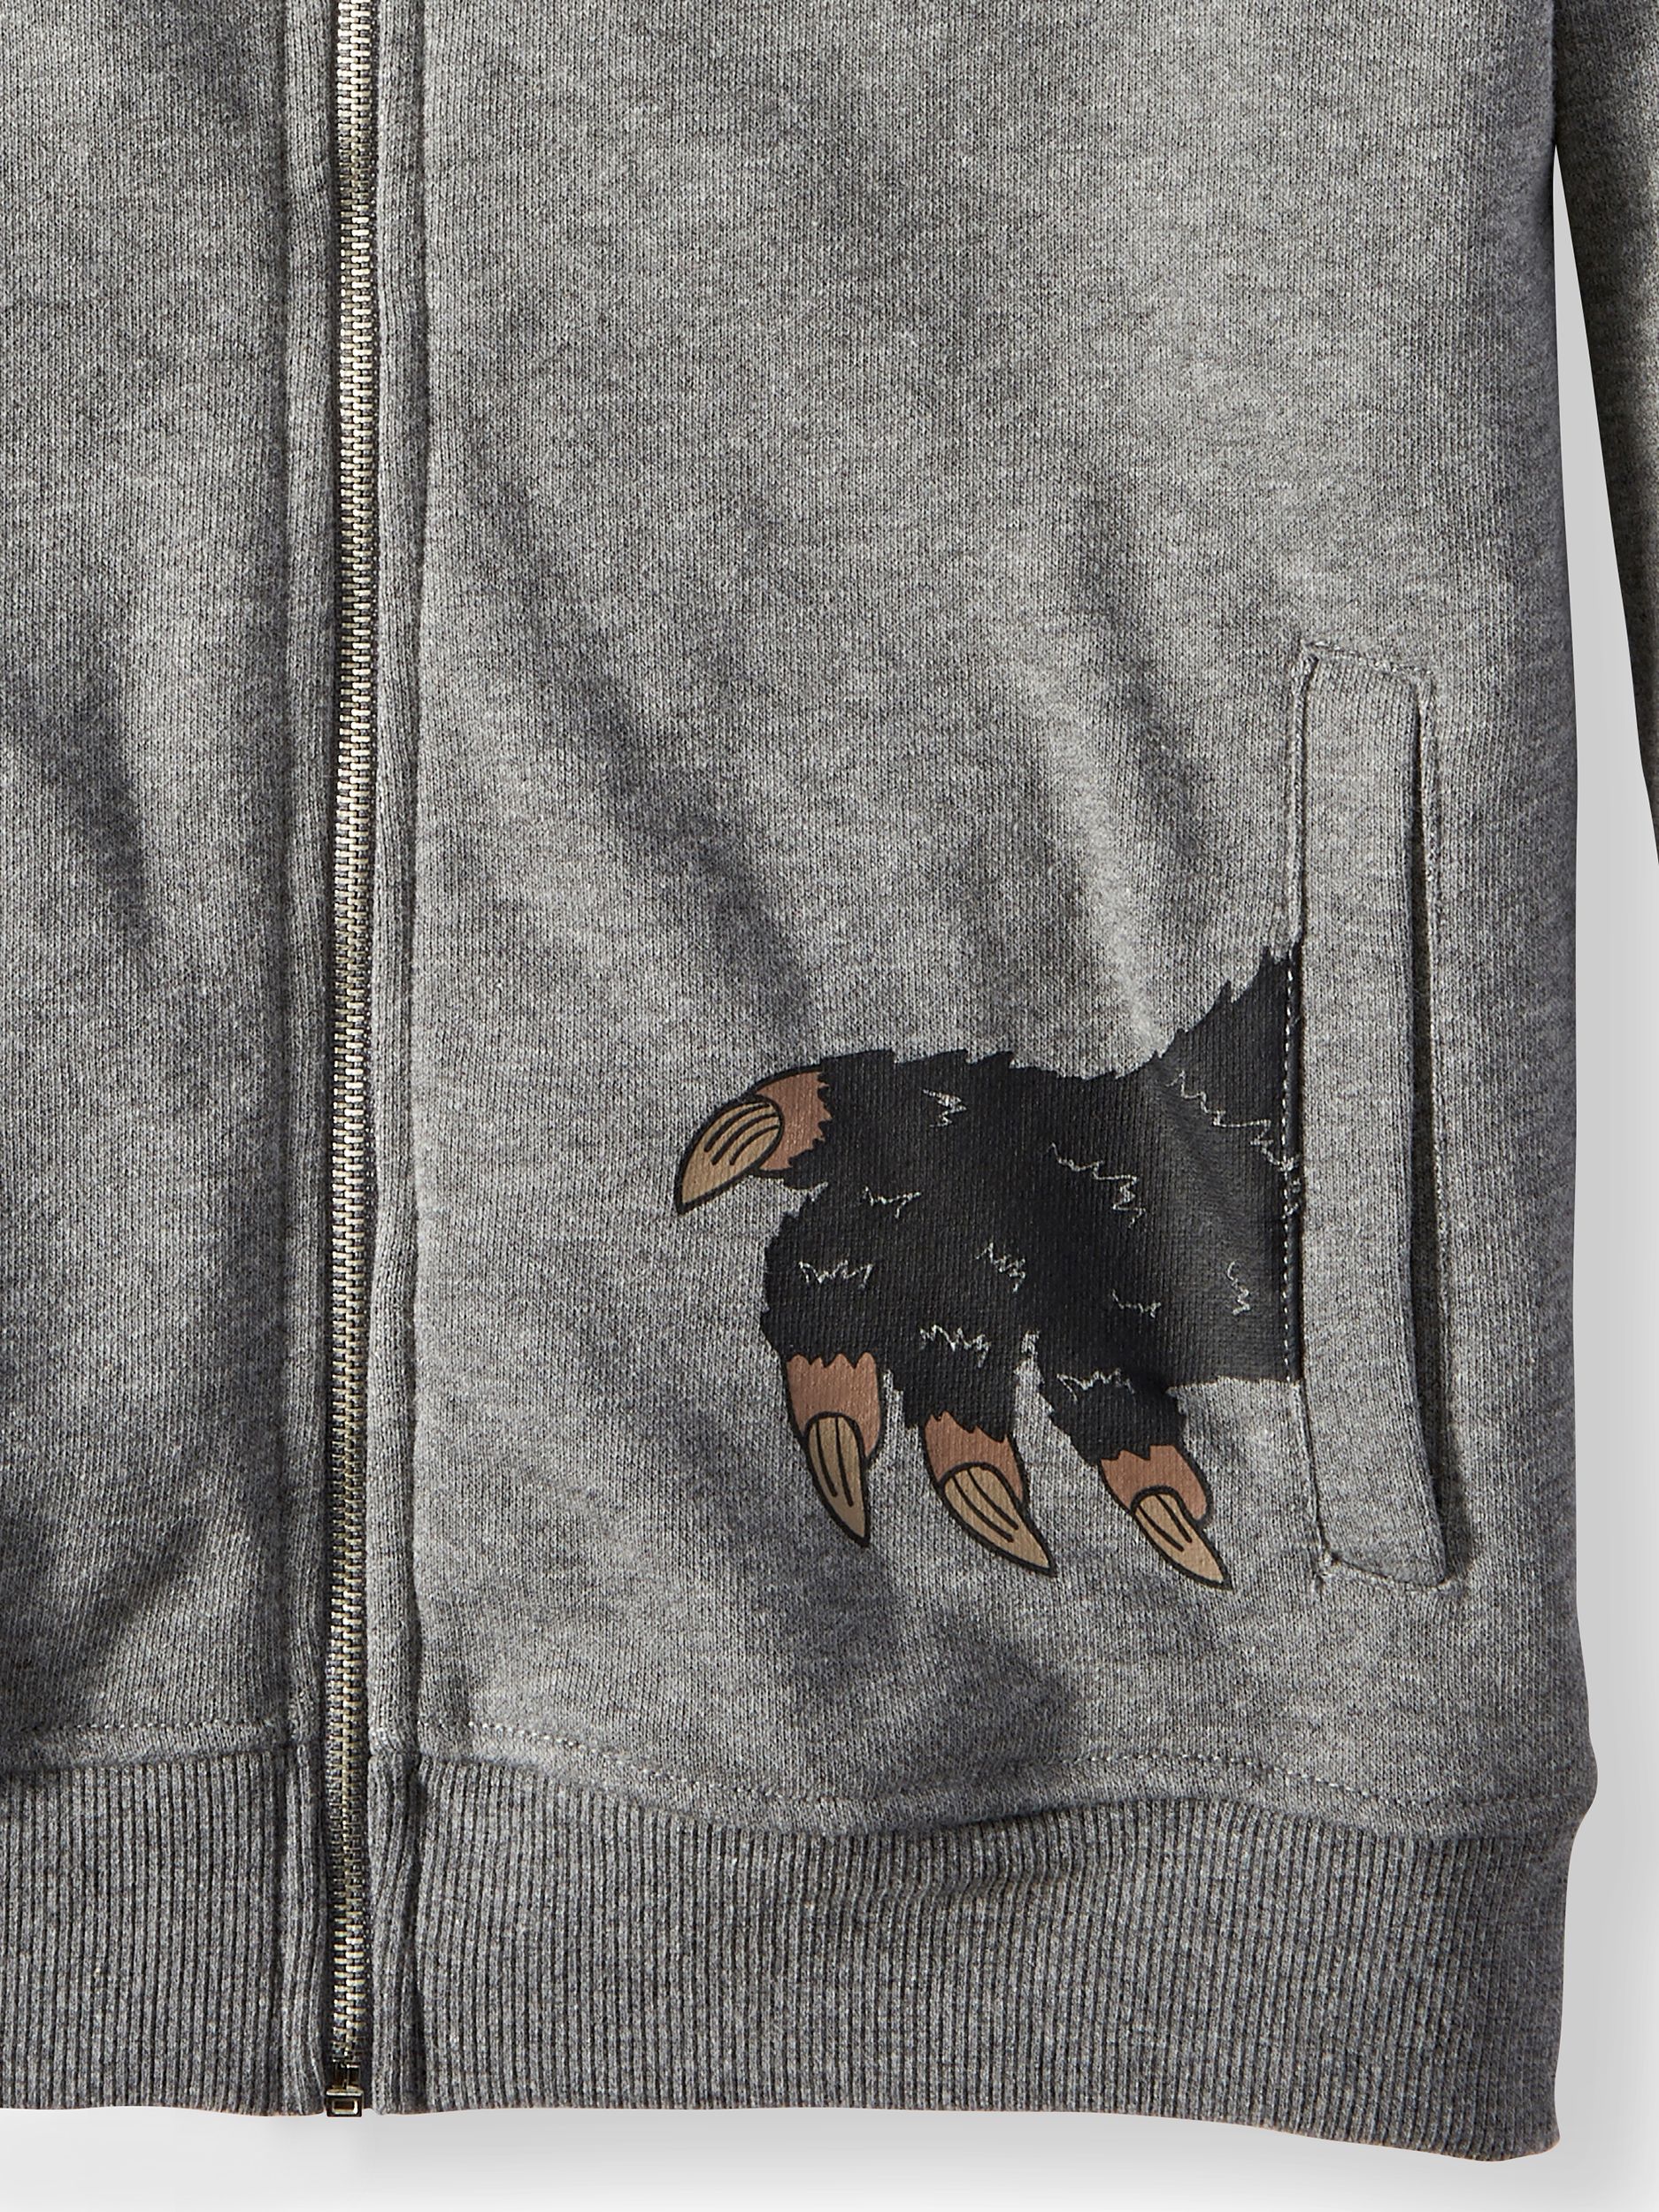 No Retreat Boys' Monster Hoodie With Fro - image 3 of 4